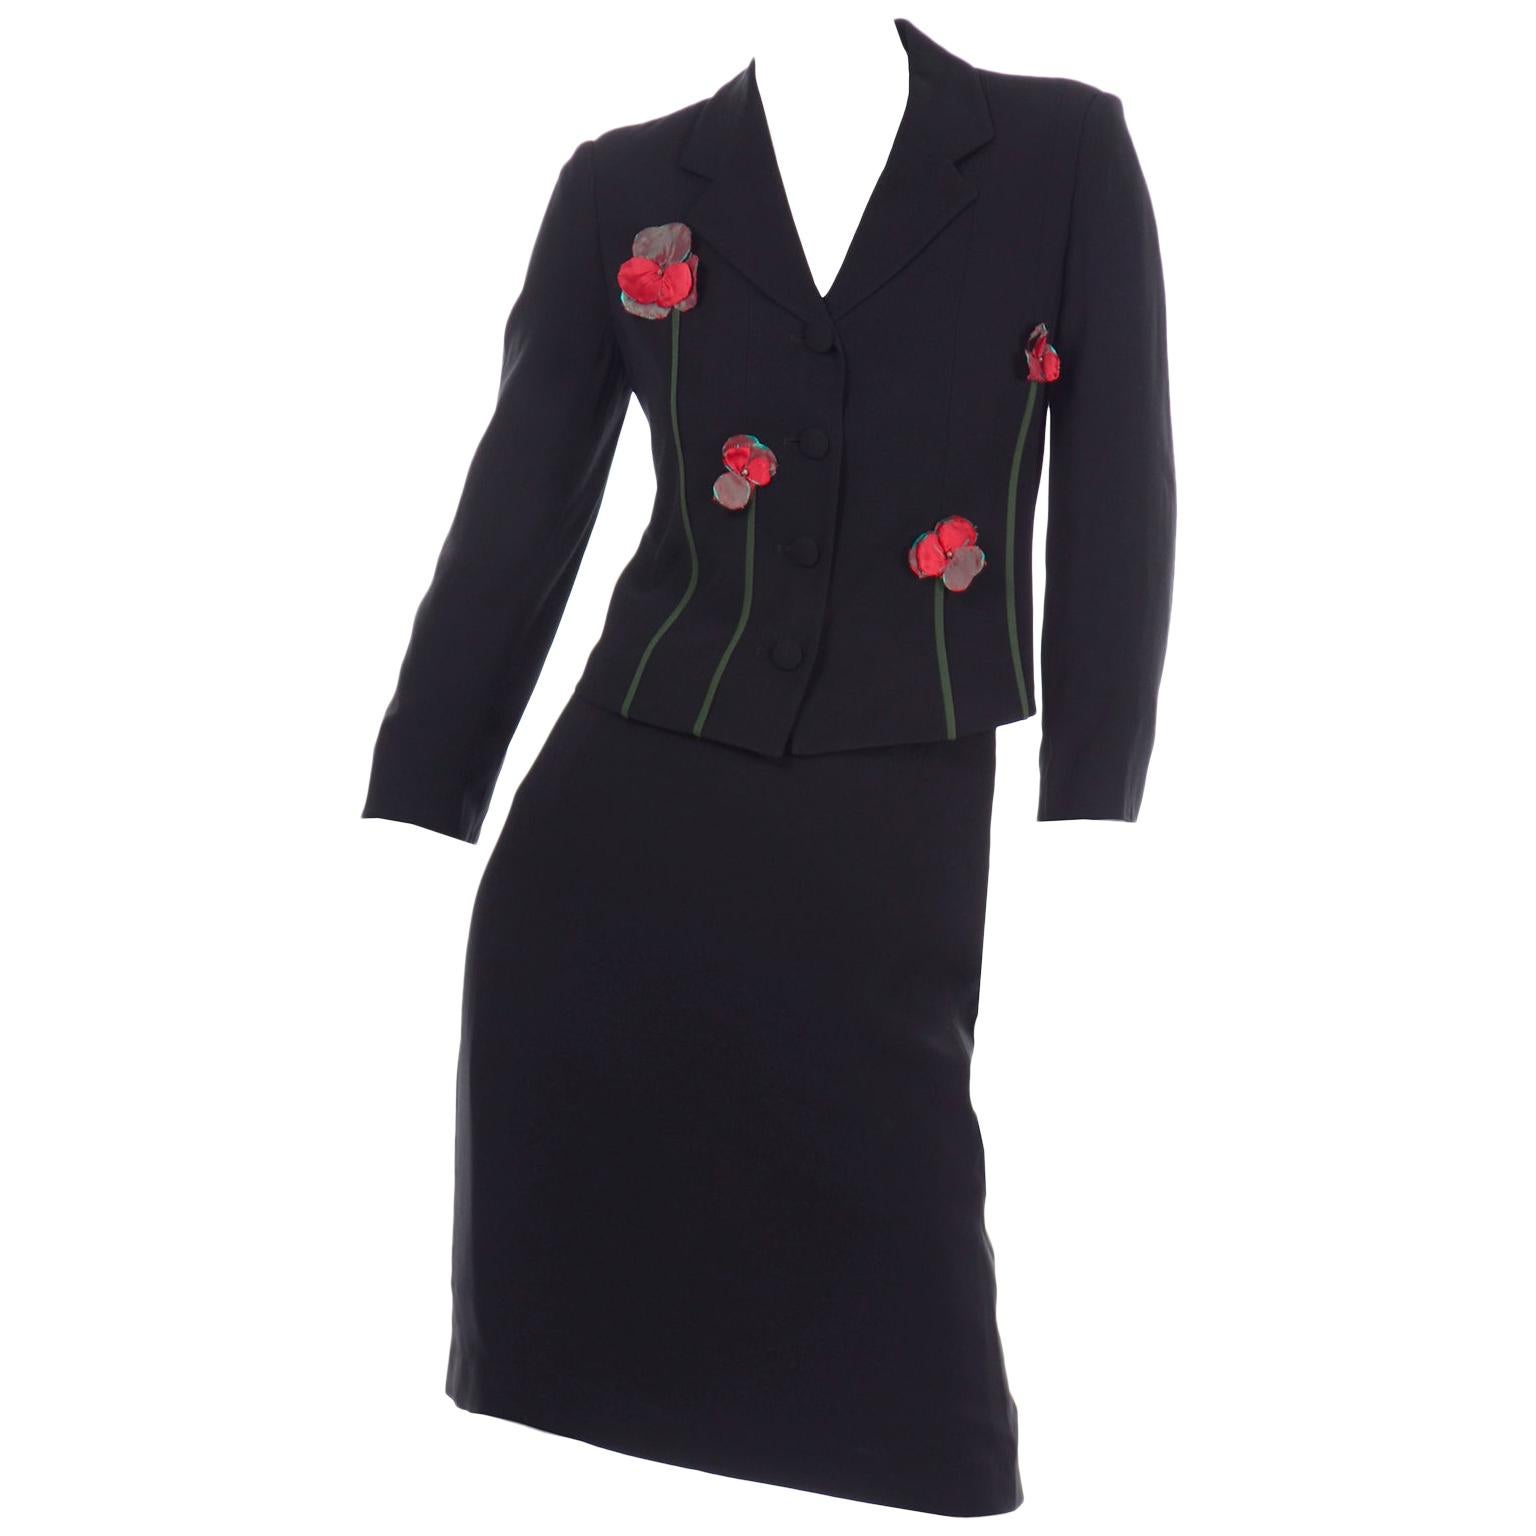 Completo moschino Femmes Vêtements Blazers & tailleurs Jupes et robes tailleurs Moschino Jupes et robes tailleurs 